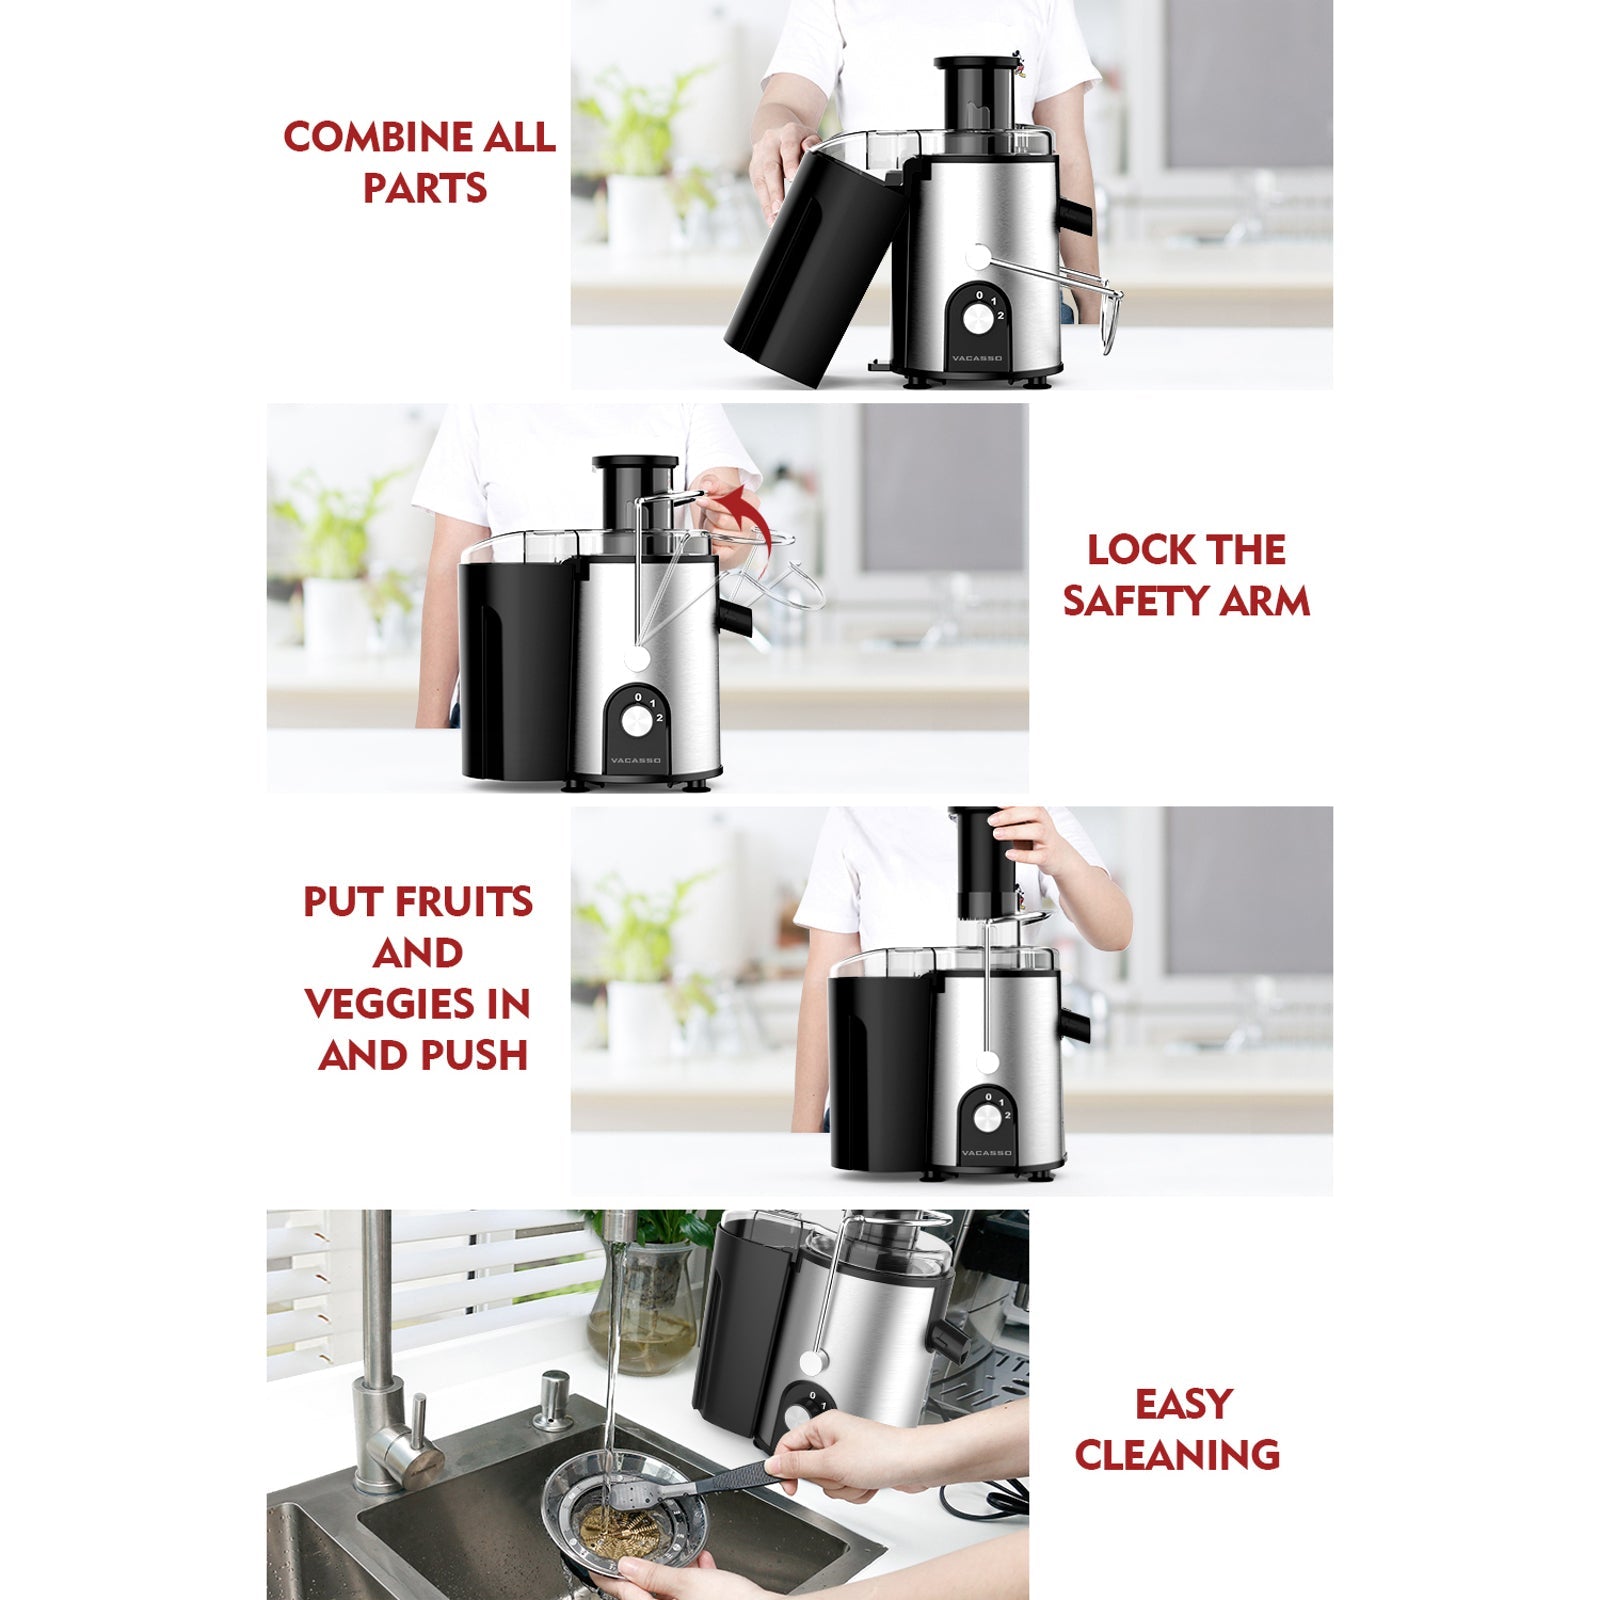 VACASSO Juicer Machine Easy to Clean with 2 Speeds for Lemon Citrus Celery Orange, 400W Centrifugal Juicer Extractor with Wide Mouth_7